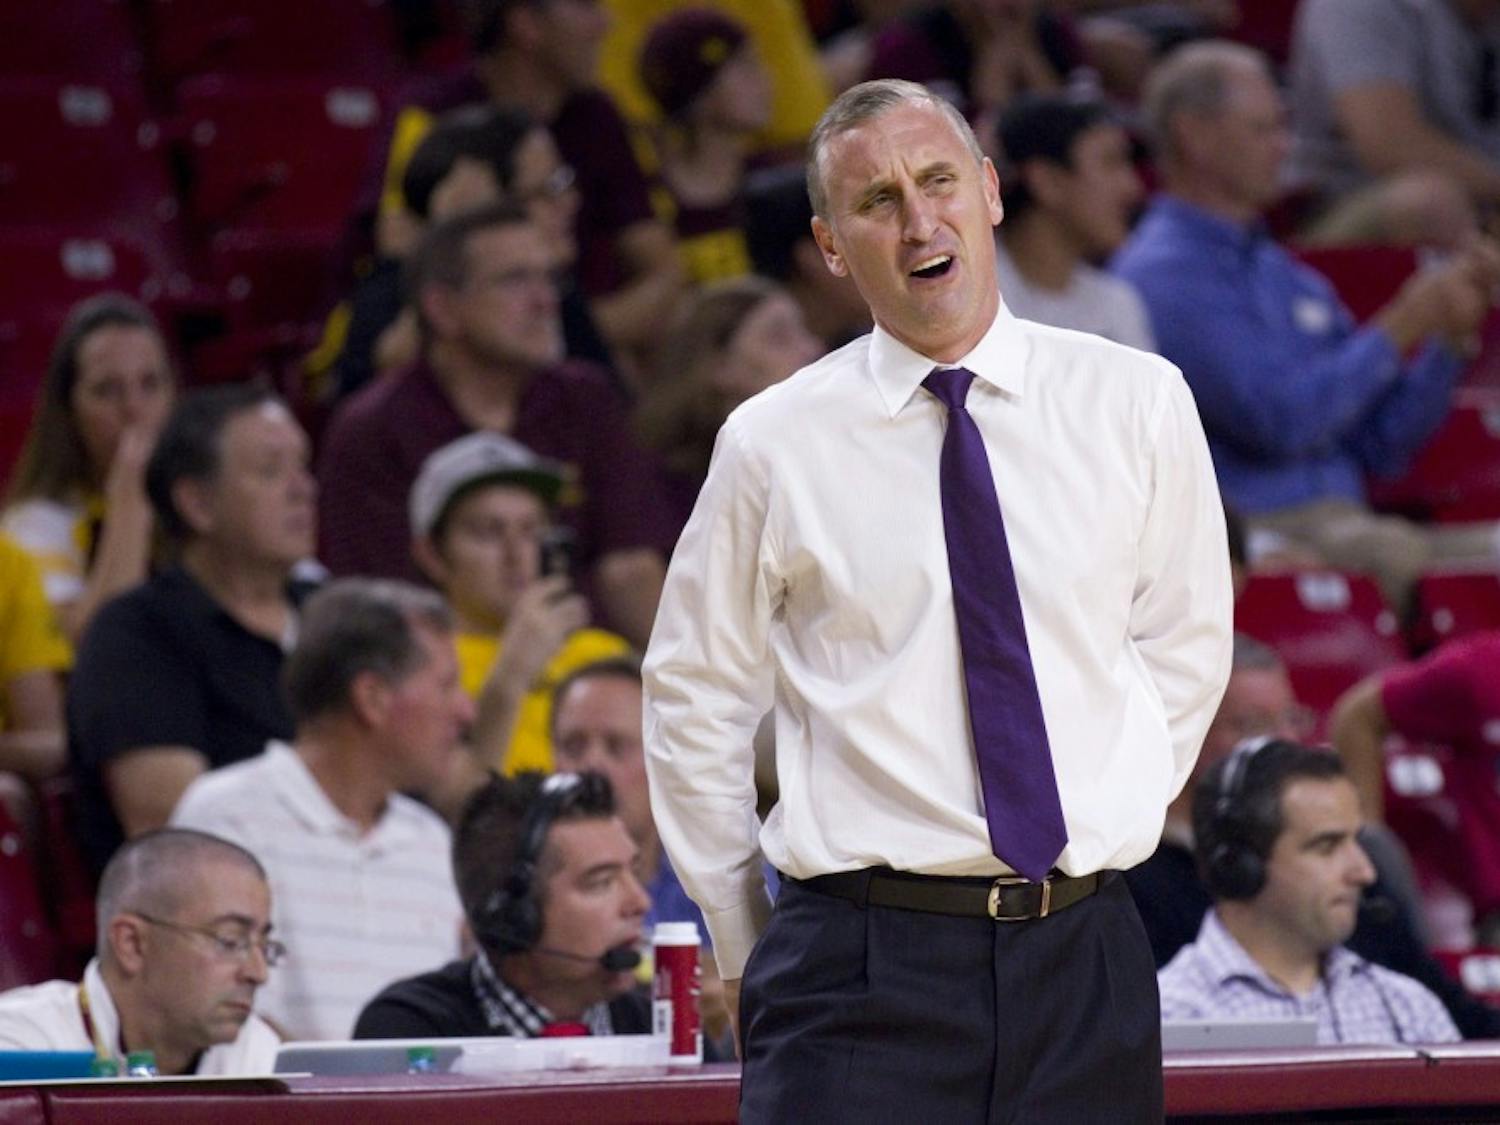 ASU men's basketball head coach Bobby Hurley reacts to a call in the second half of a 127-110 victory over the Citadel Bulldogs in Wells Fargo Arena in Tempe, Arizona on Wednesday, Nov. 23, 2016.